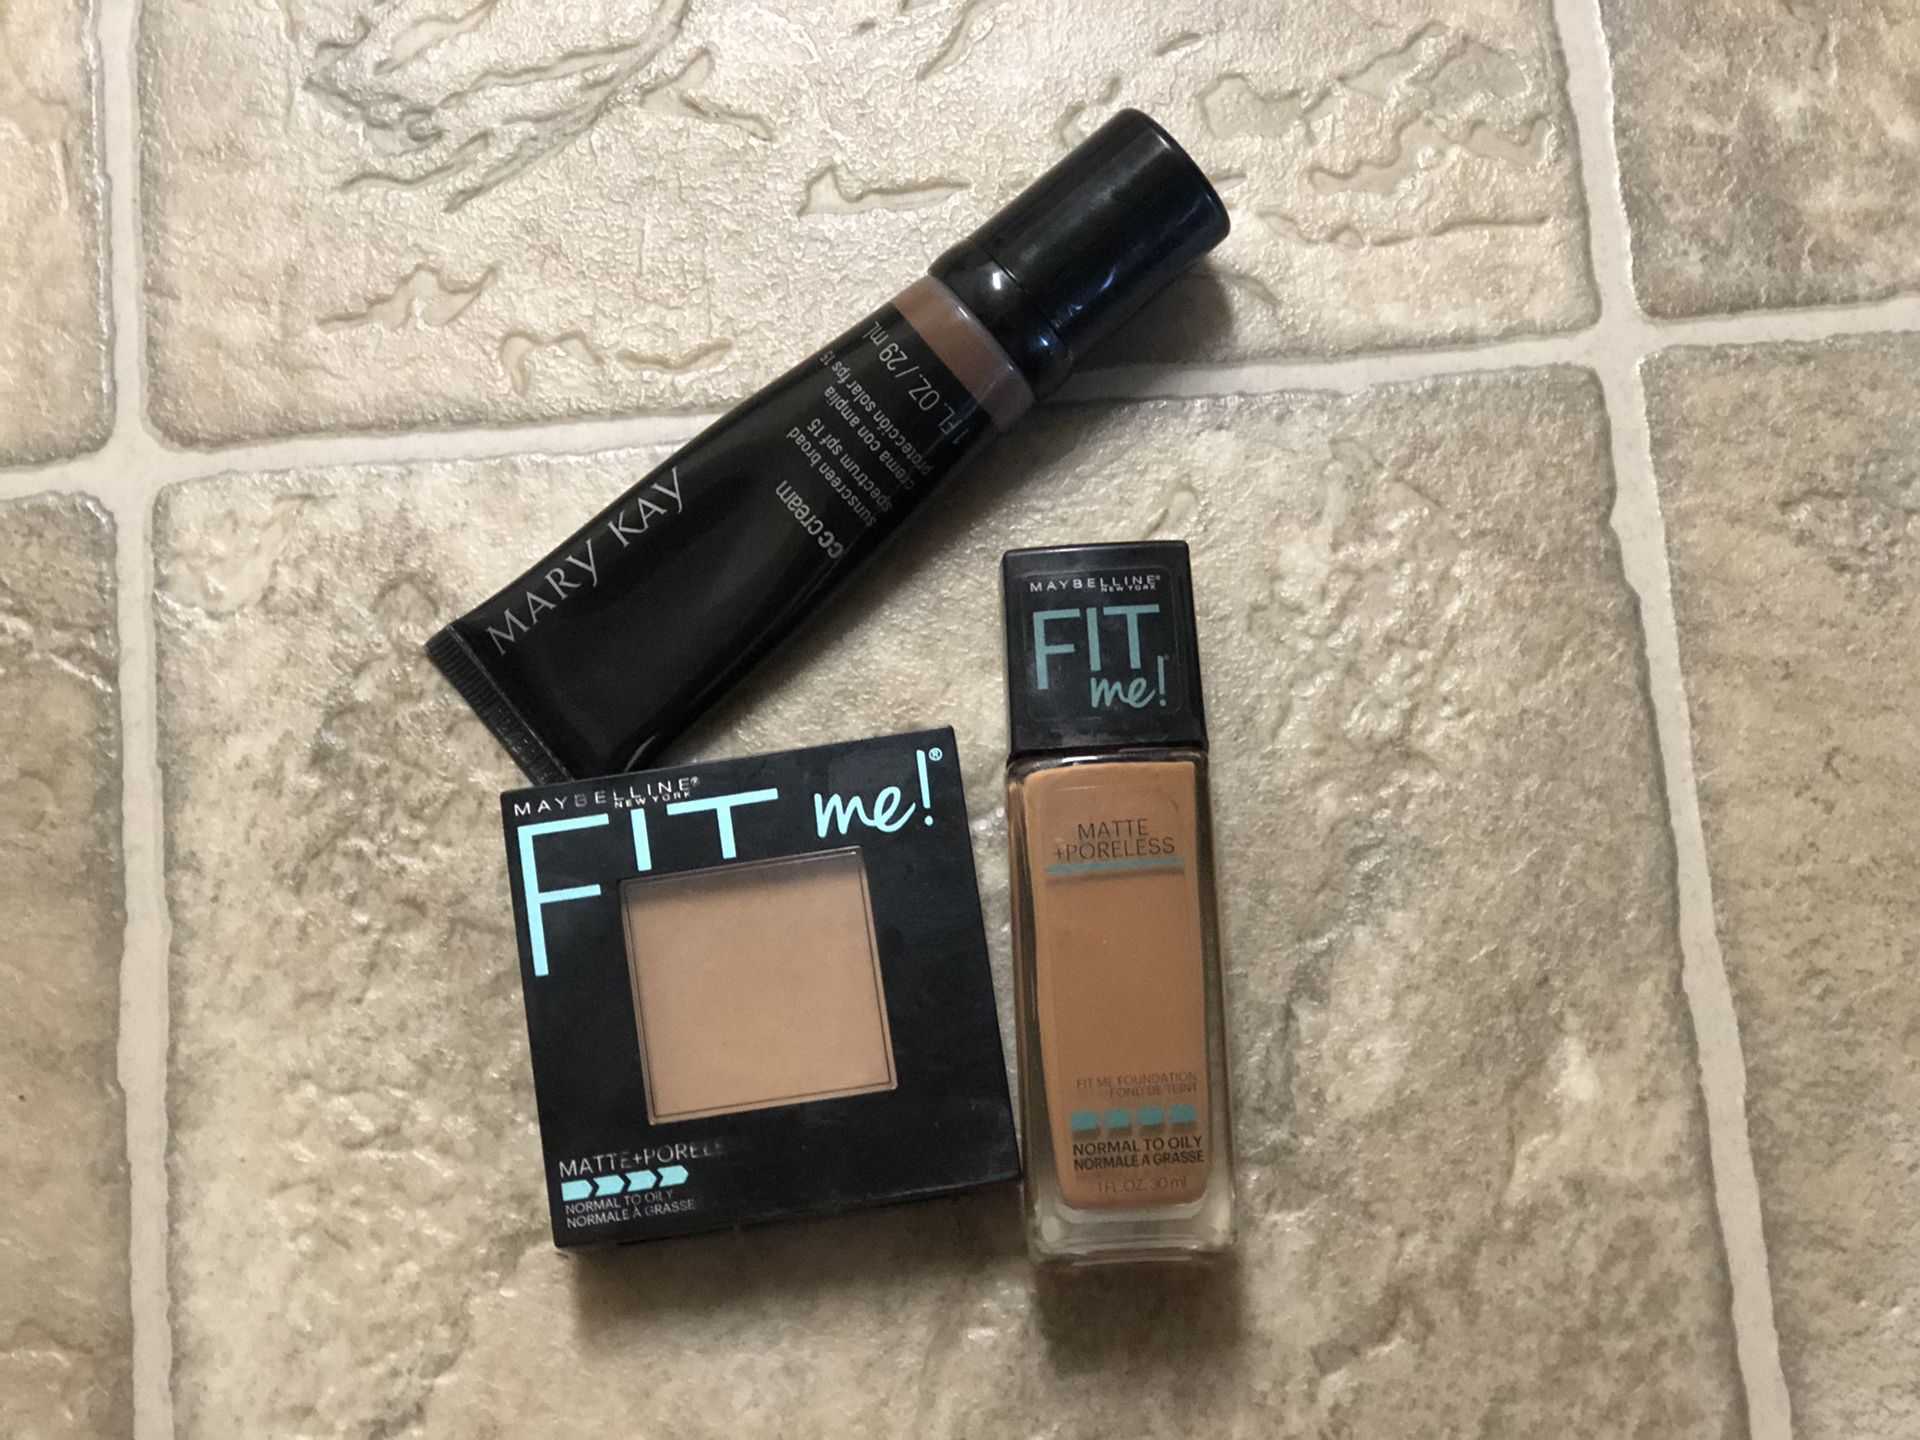 Mary Kay cc cream and Fit me foundation and setting powder